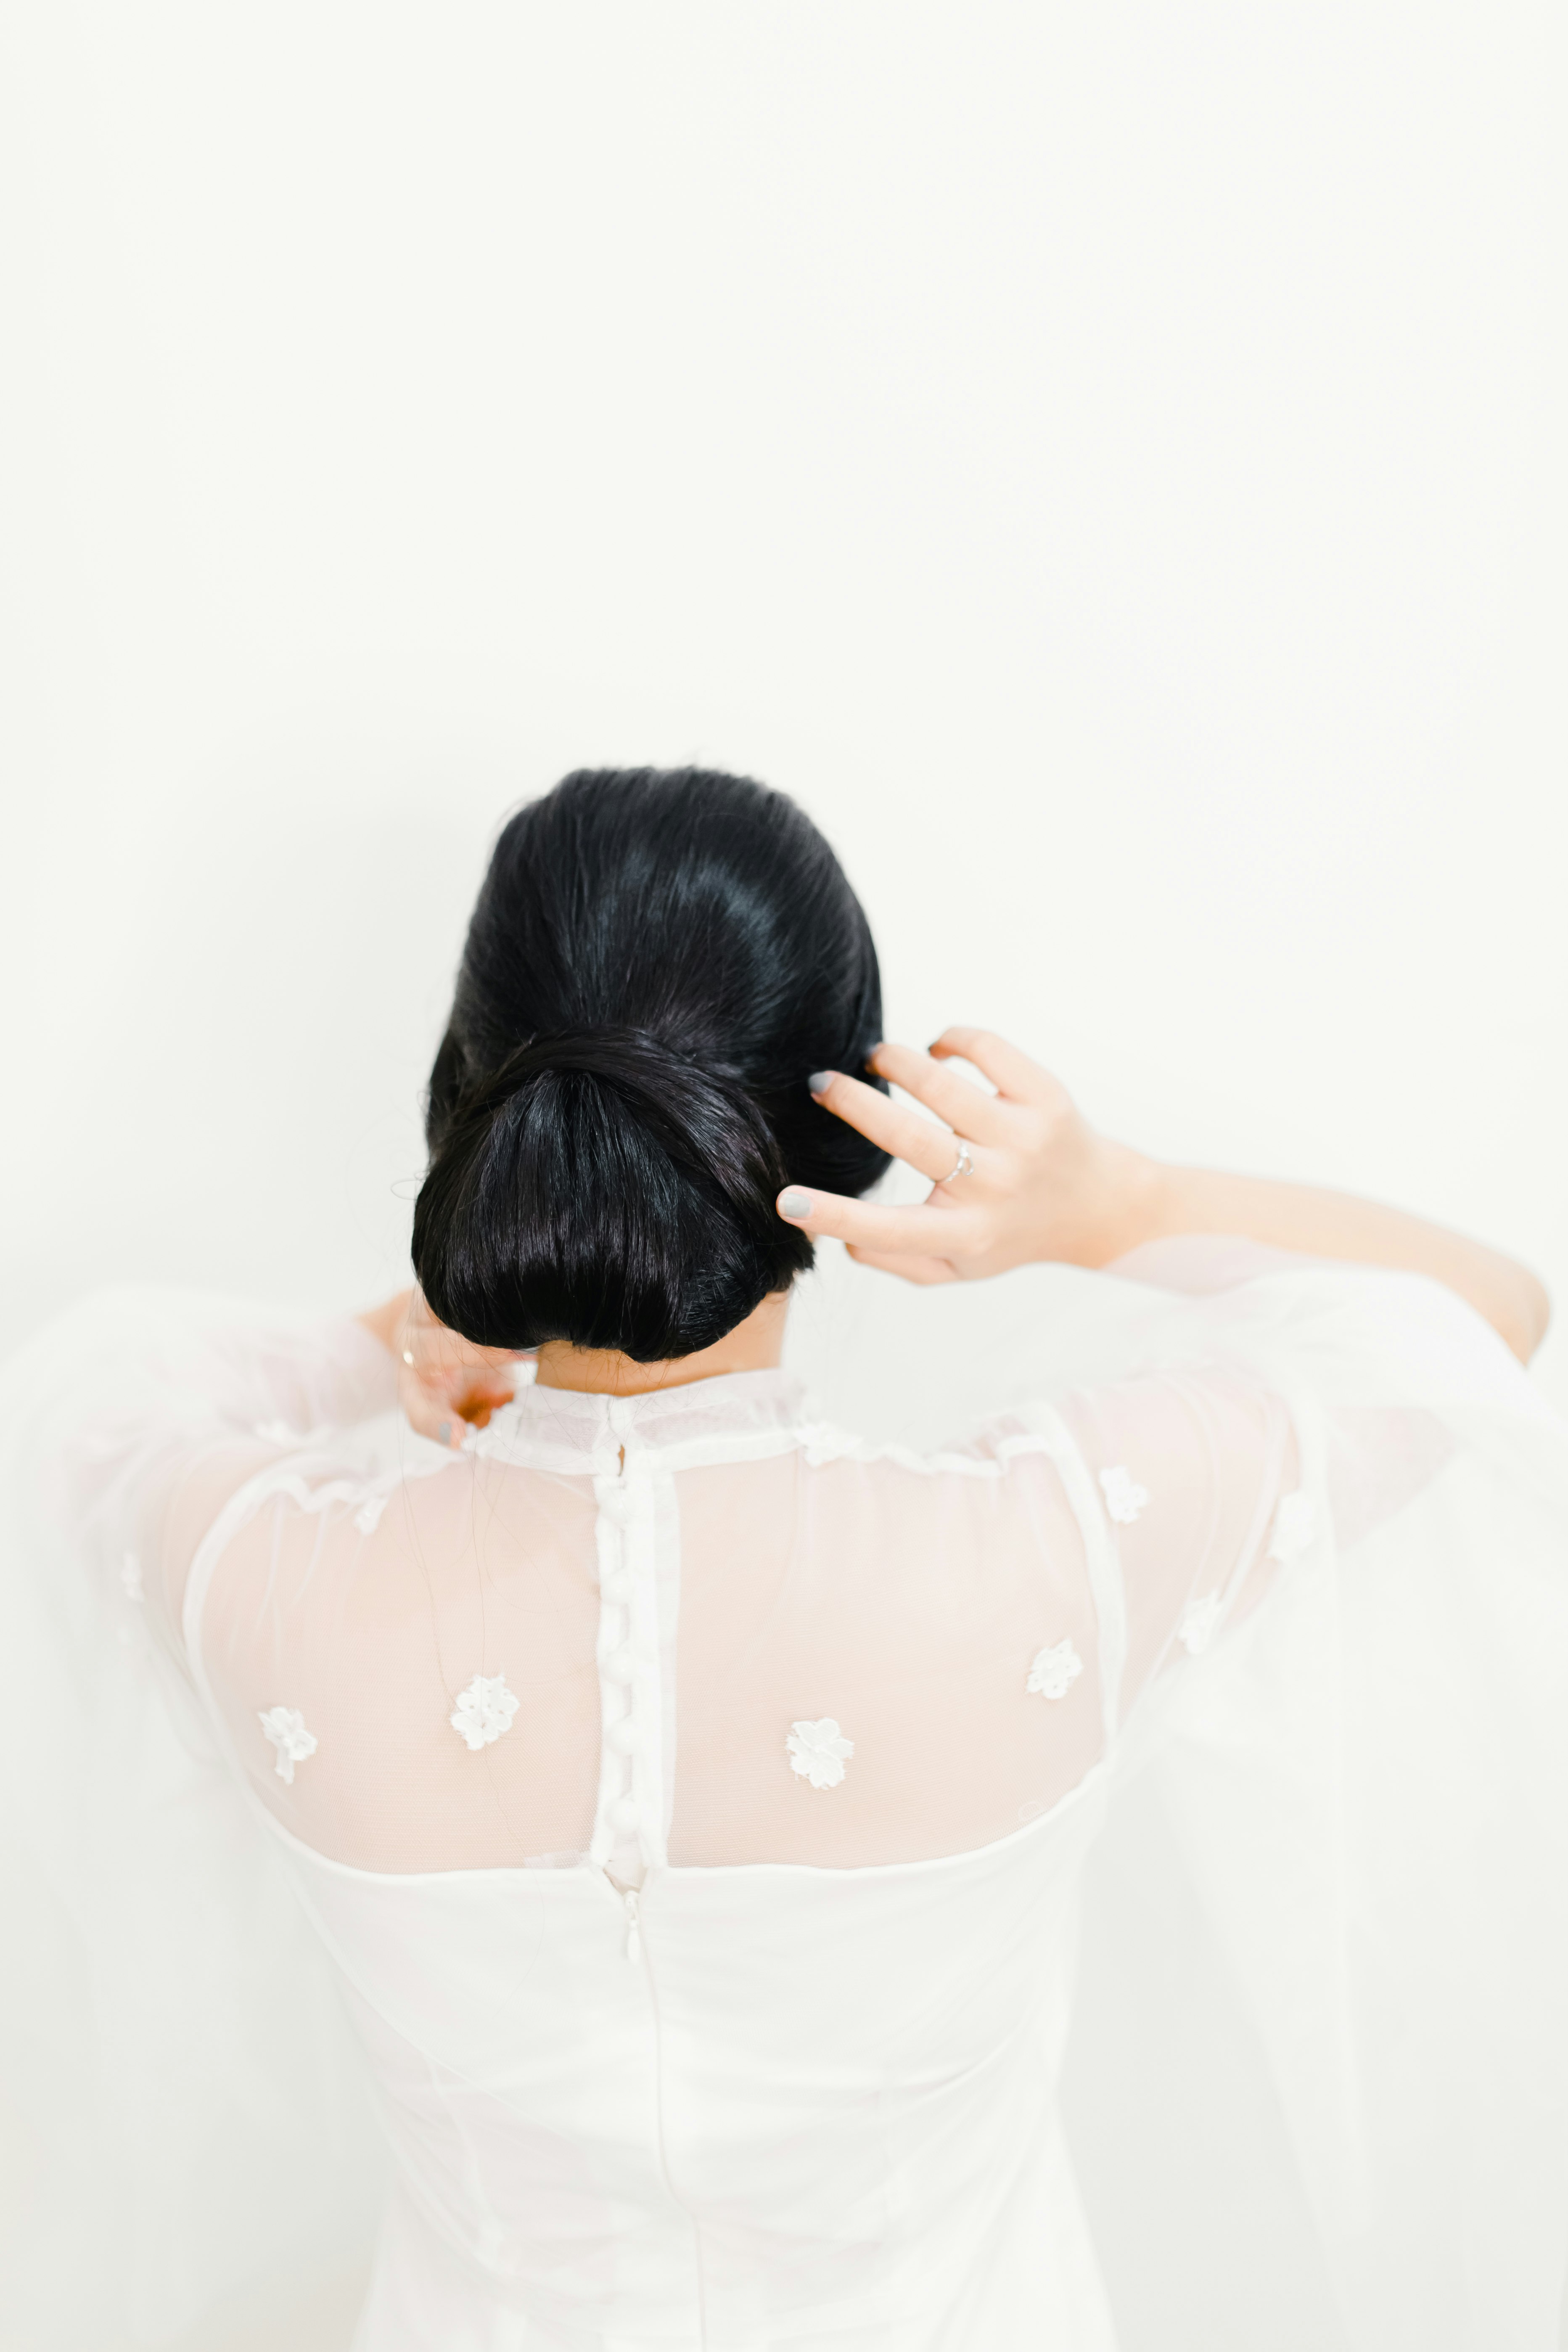 woman in white dress covering her face